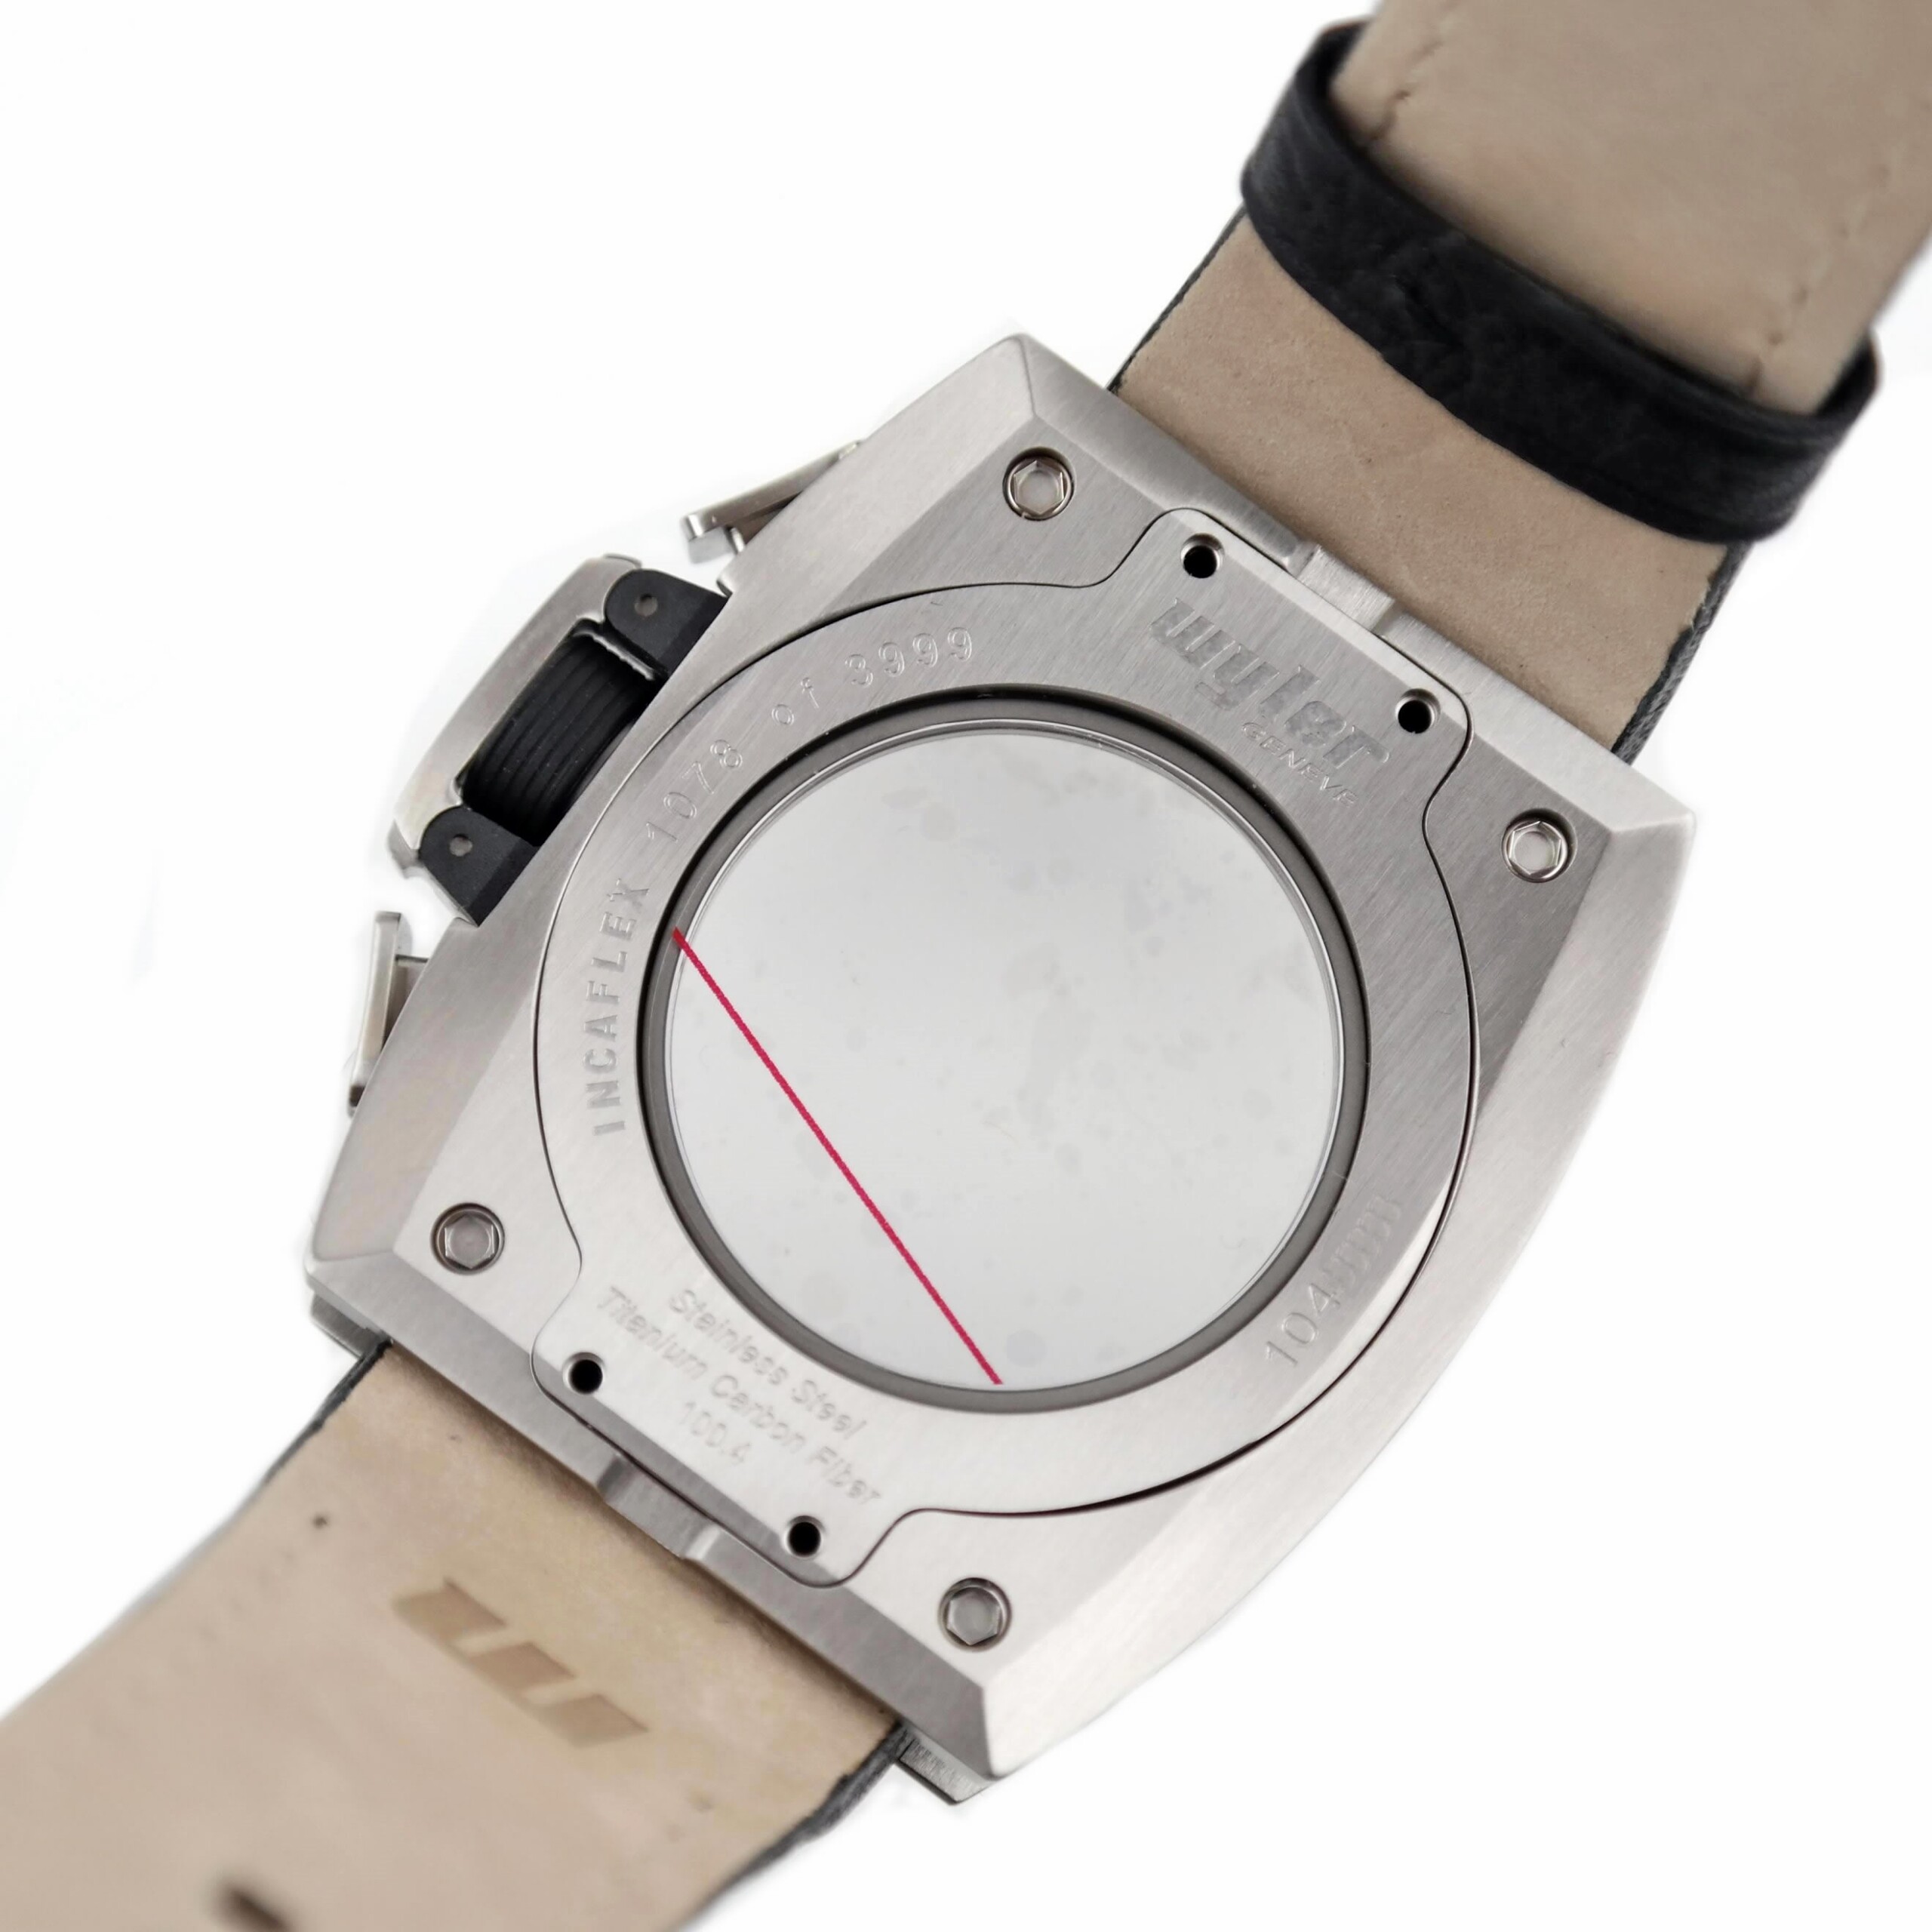 WYLER Geneve - Code R - Original Watch Case, Dial and Strap